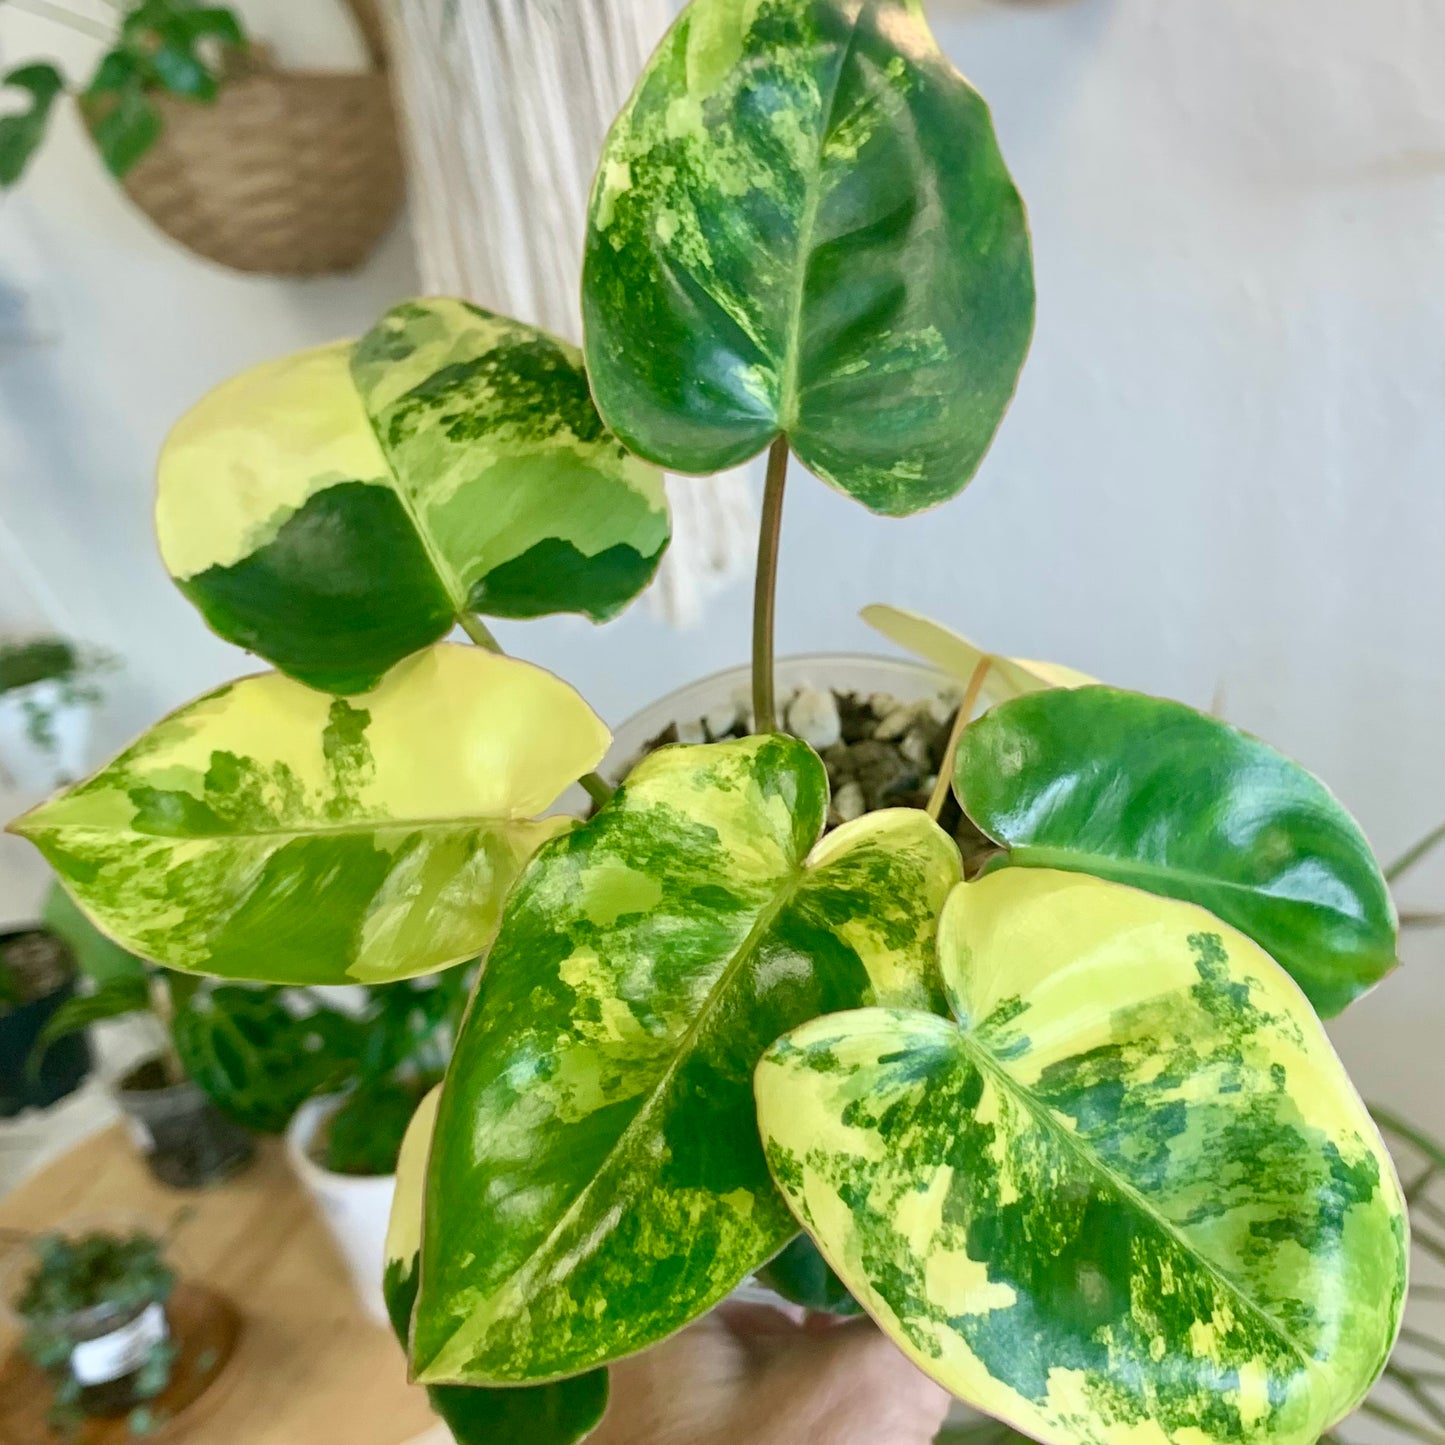 Variegated Burle Marx Philodendron